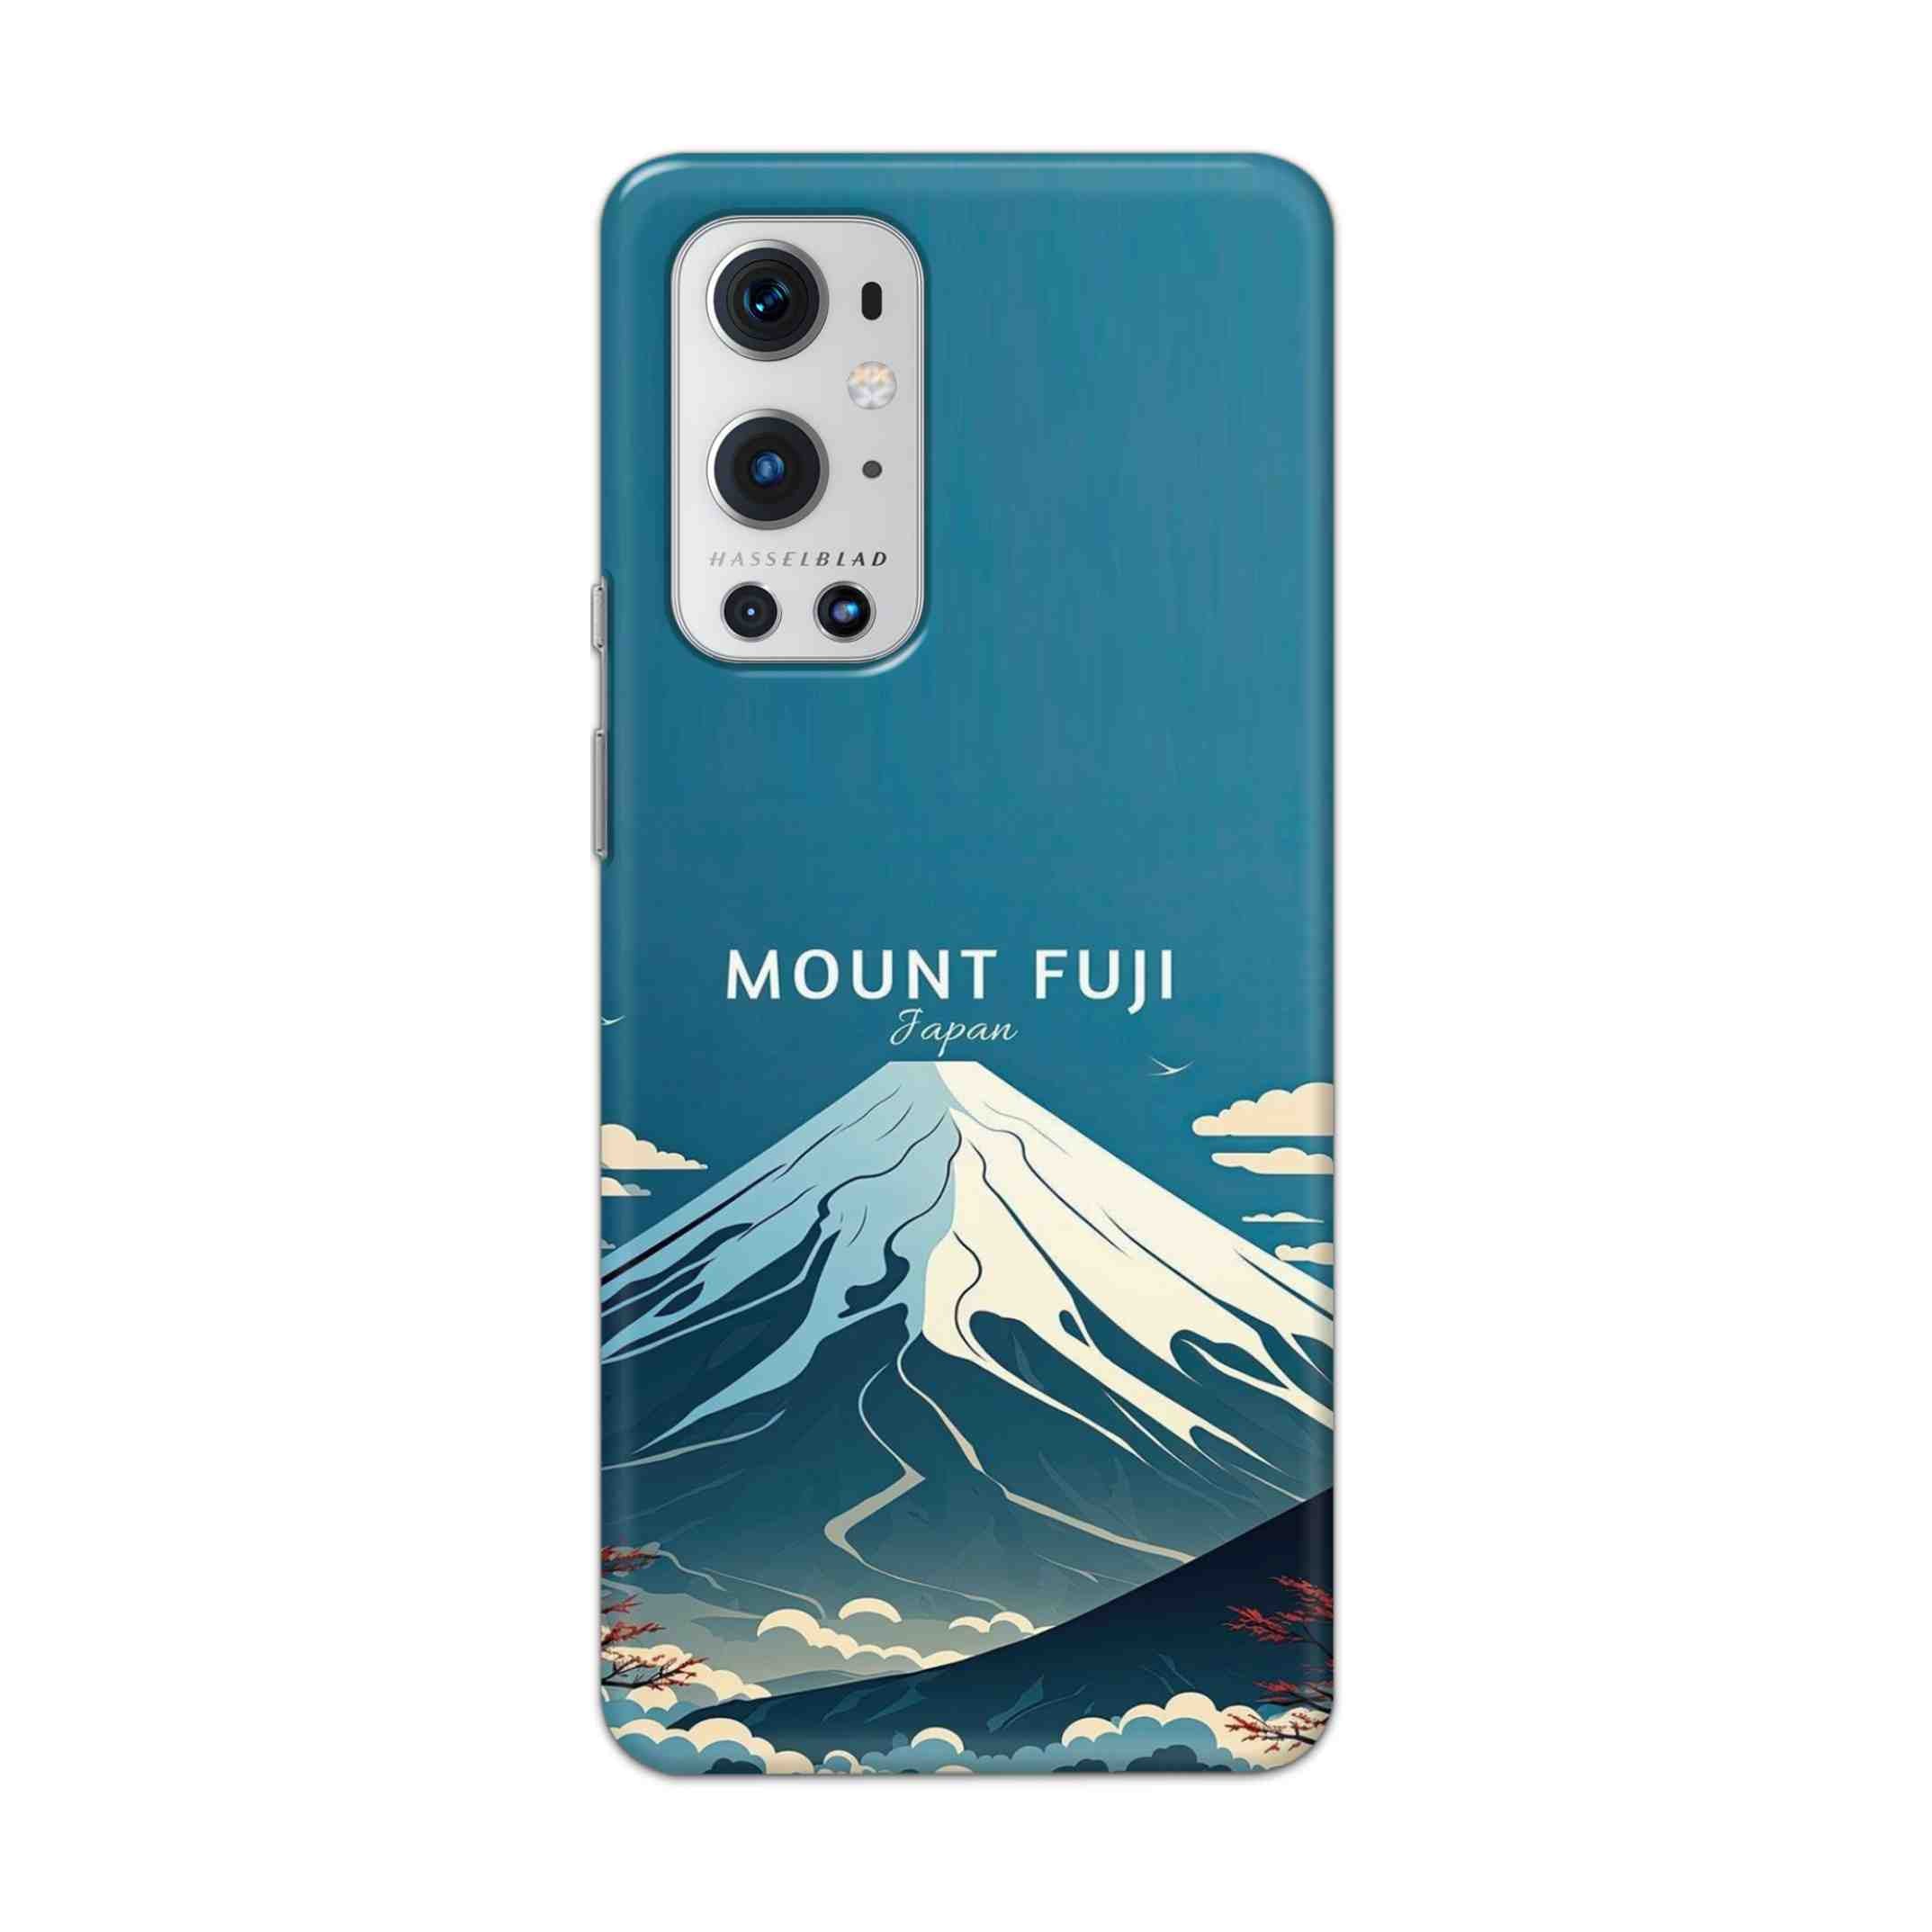 Buy Mount Fuji Hard Back Mobile Phone Case Cover For OnePlus 9 Pro Online